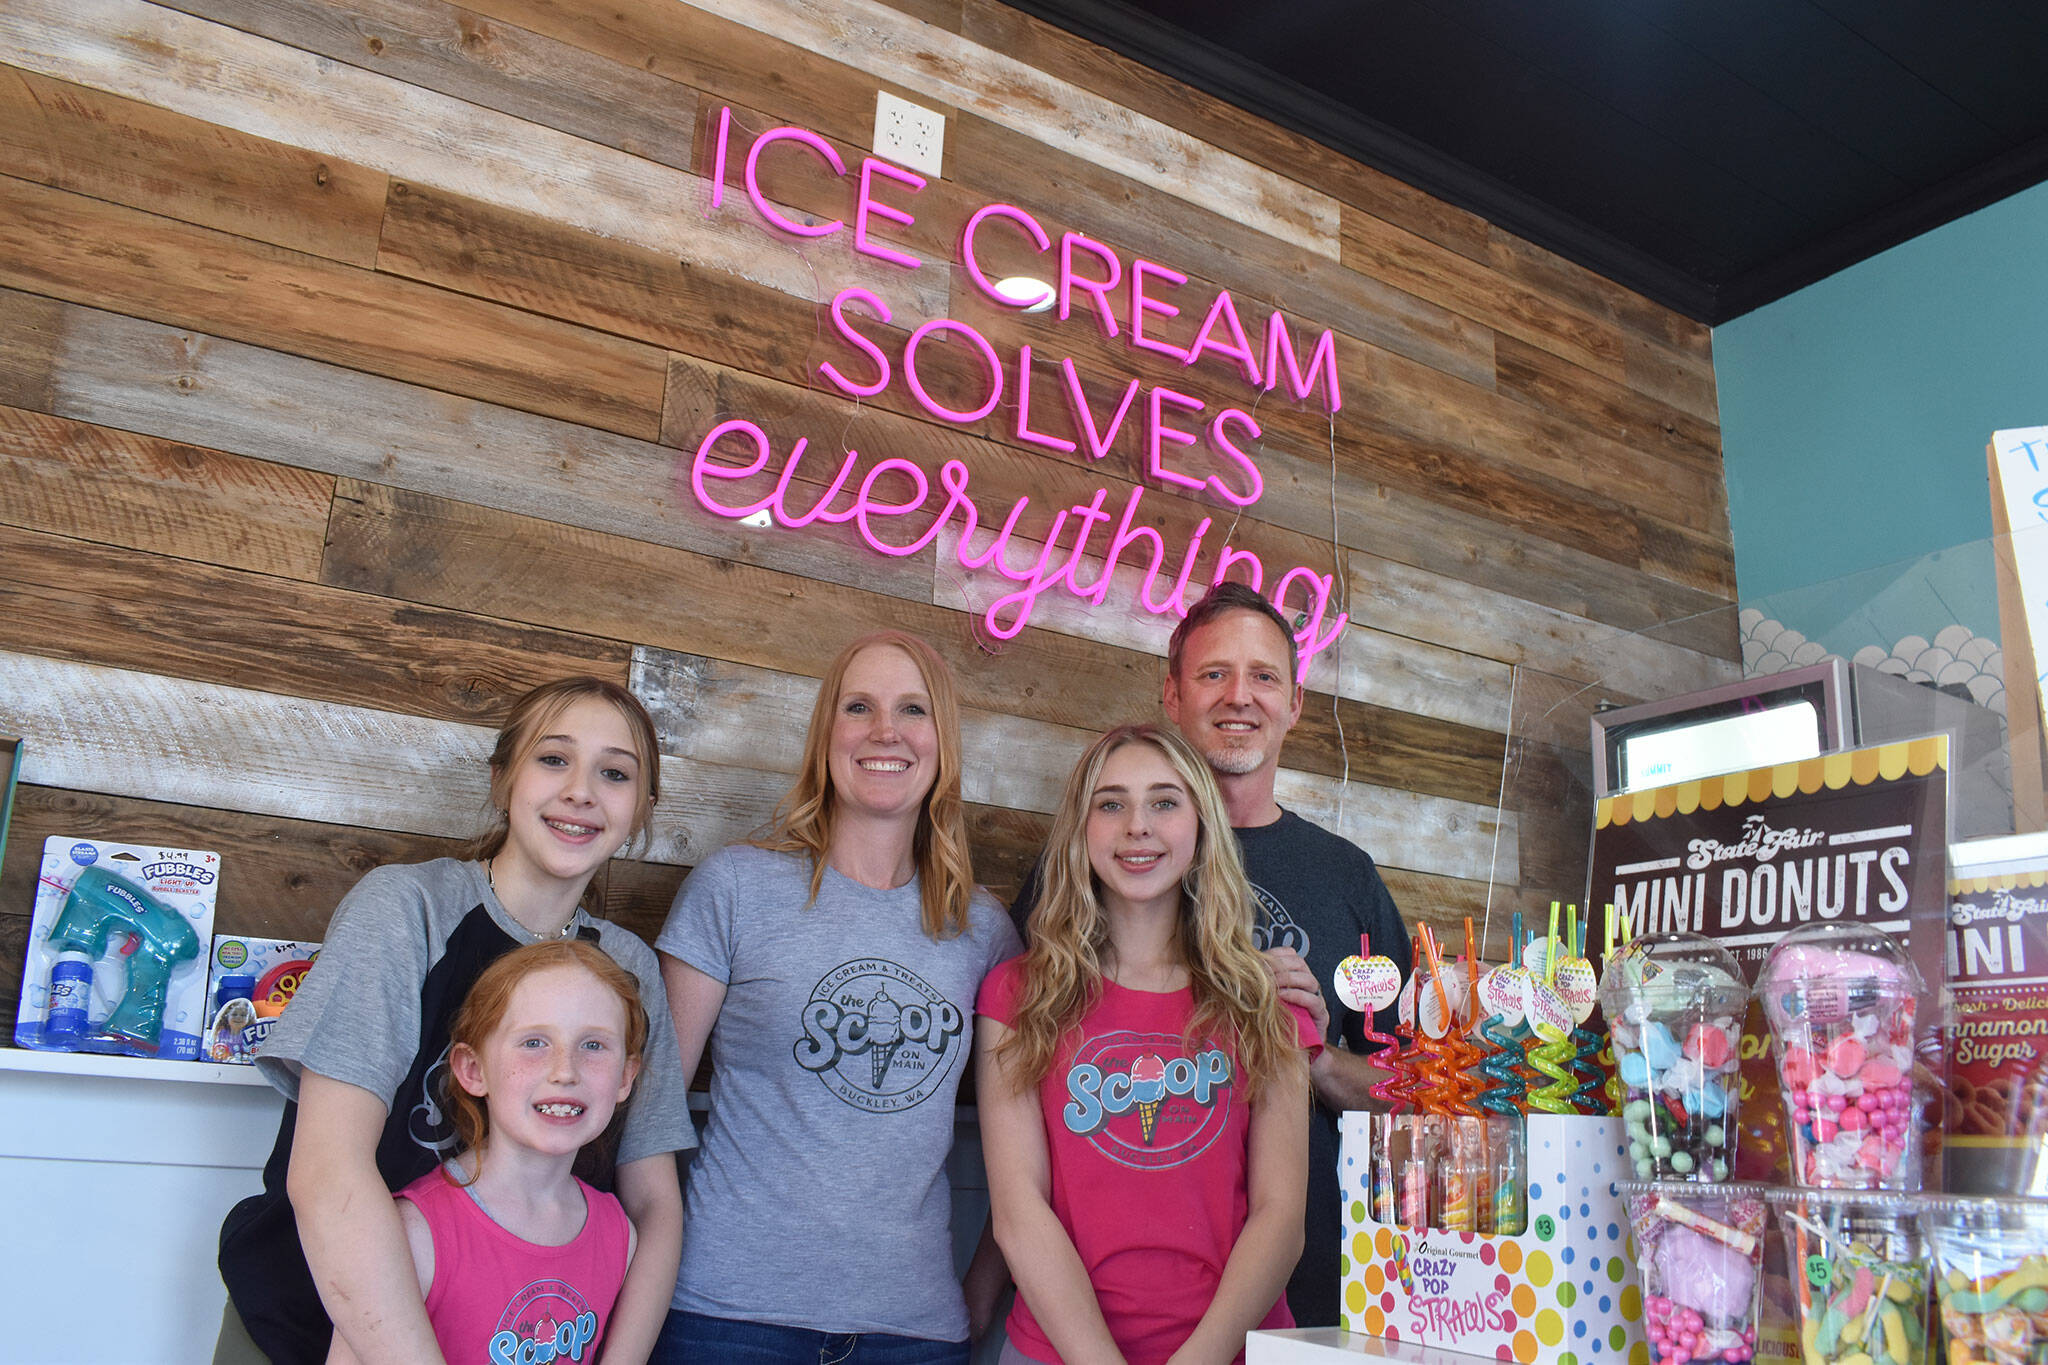 The Rattray family, from left to right: Maddin and Addison, April, Kaitlin and Bill pose for a photo at their new ice cream shop in Buckley. Photo by Alex Bruell.